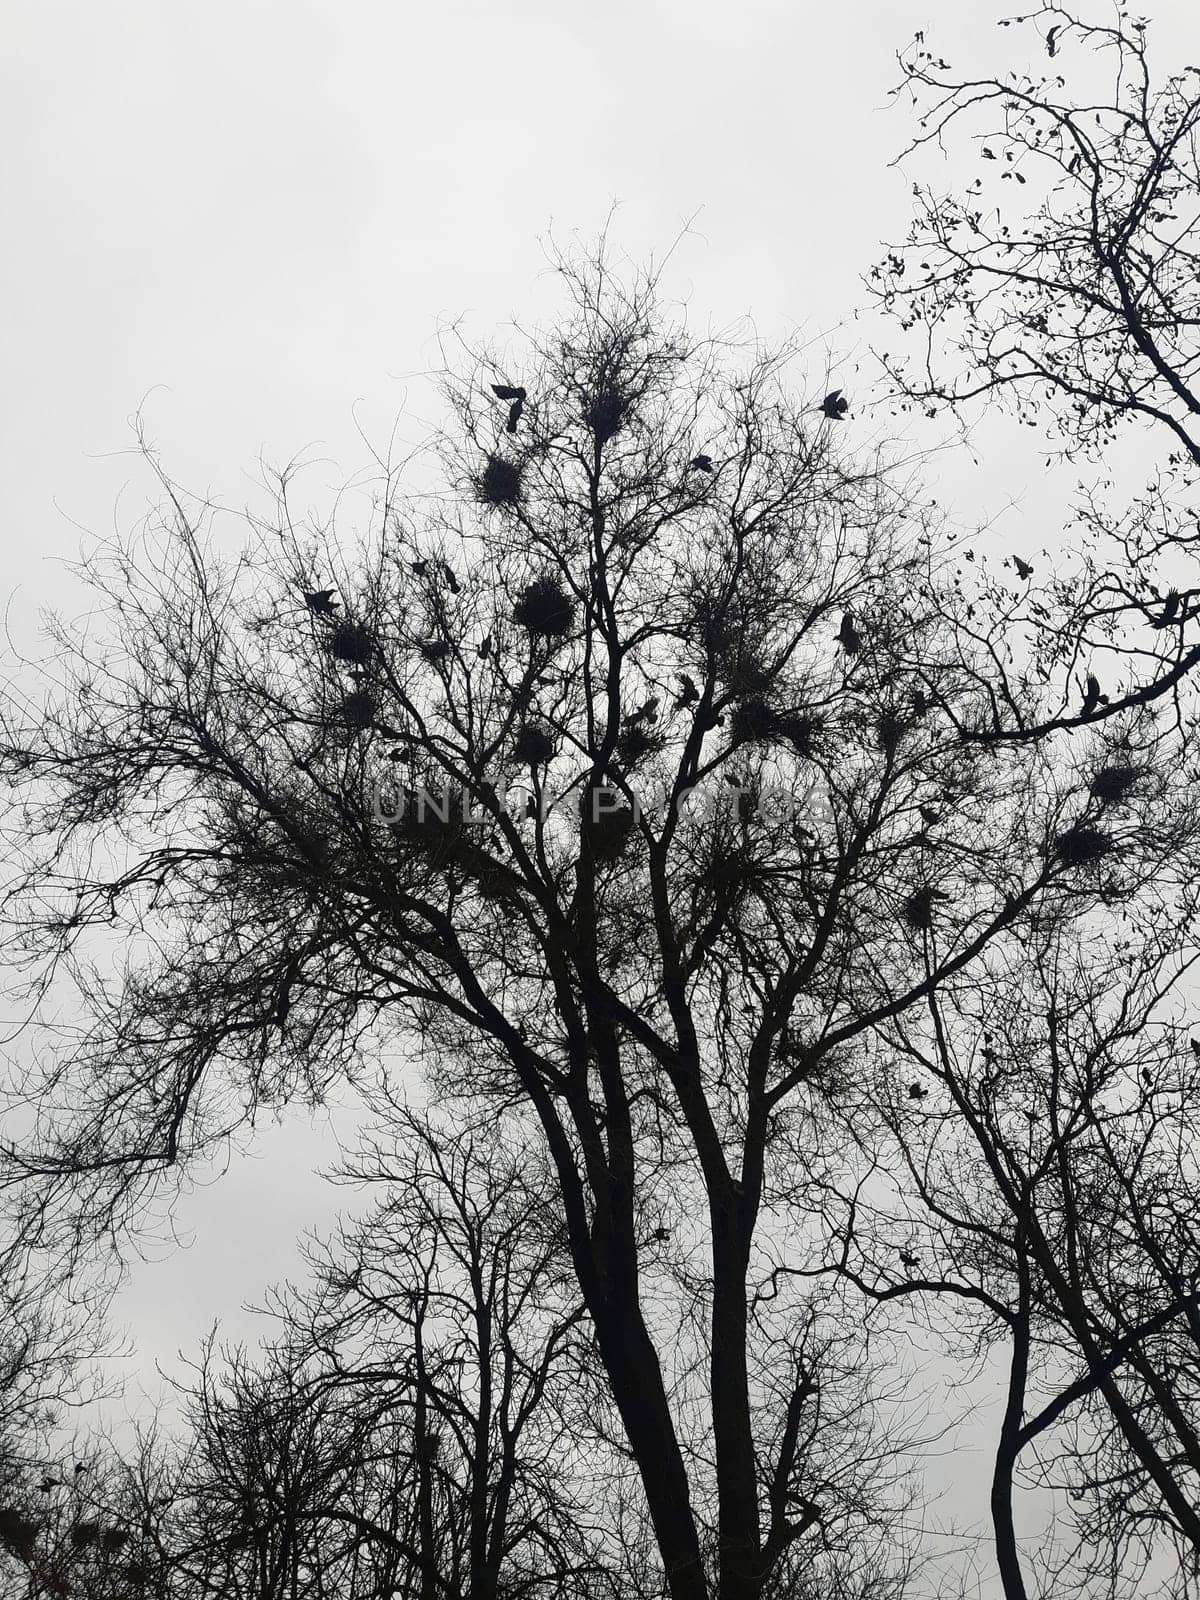 On a spring day, crows build their nests on a tall tree in the park. Crow's nest on a tree.